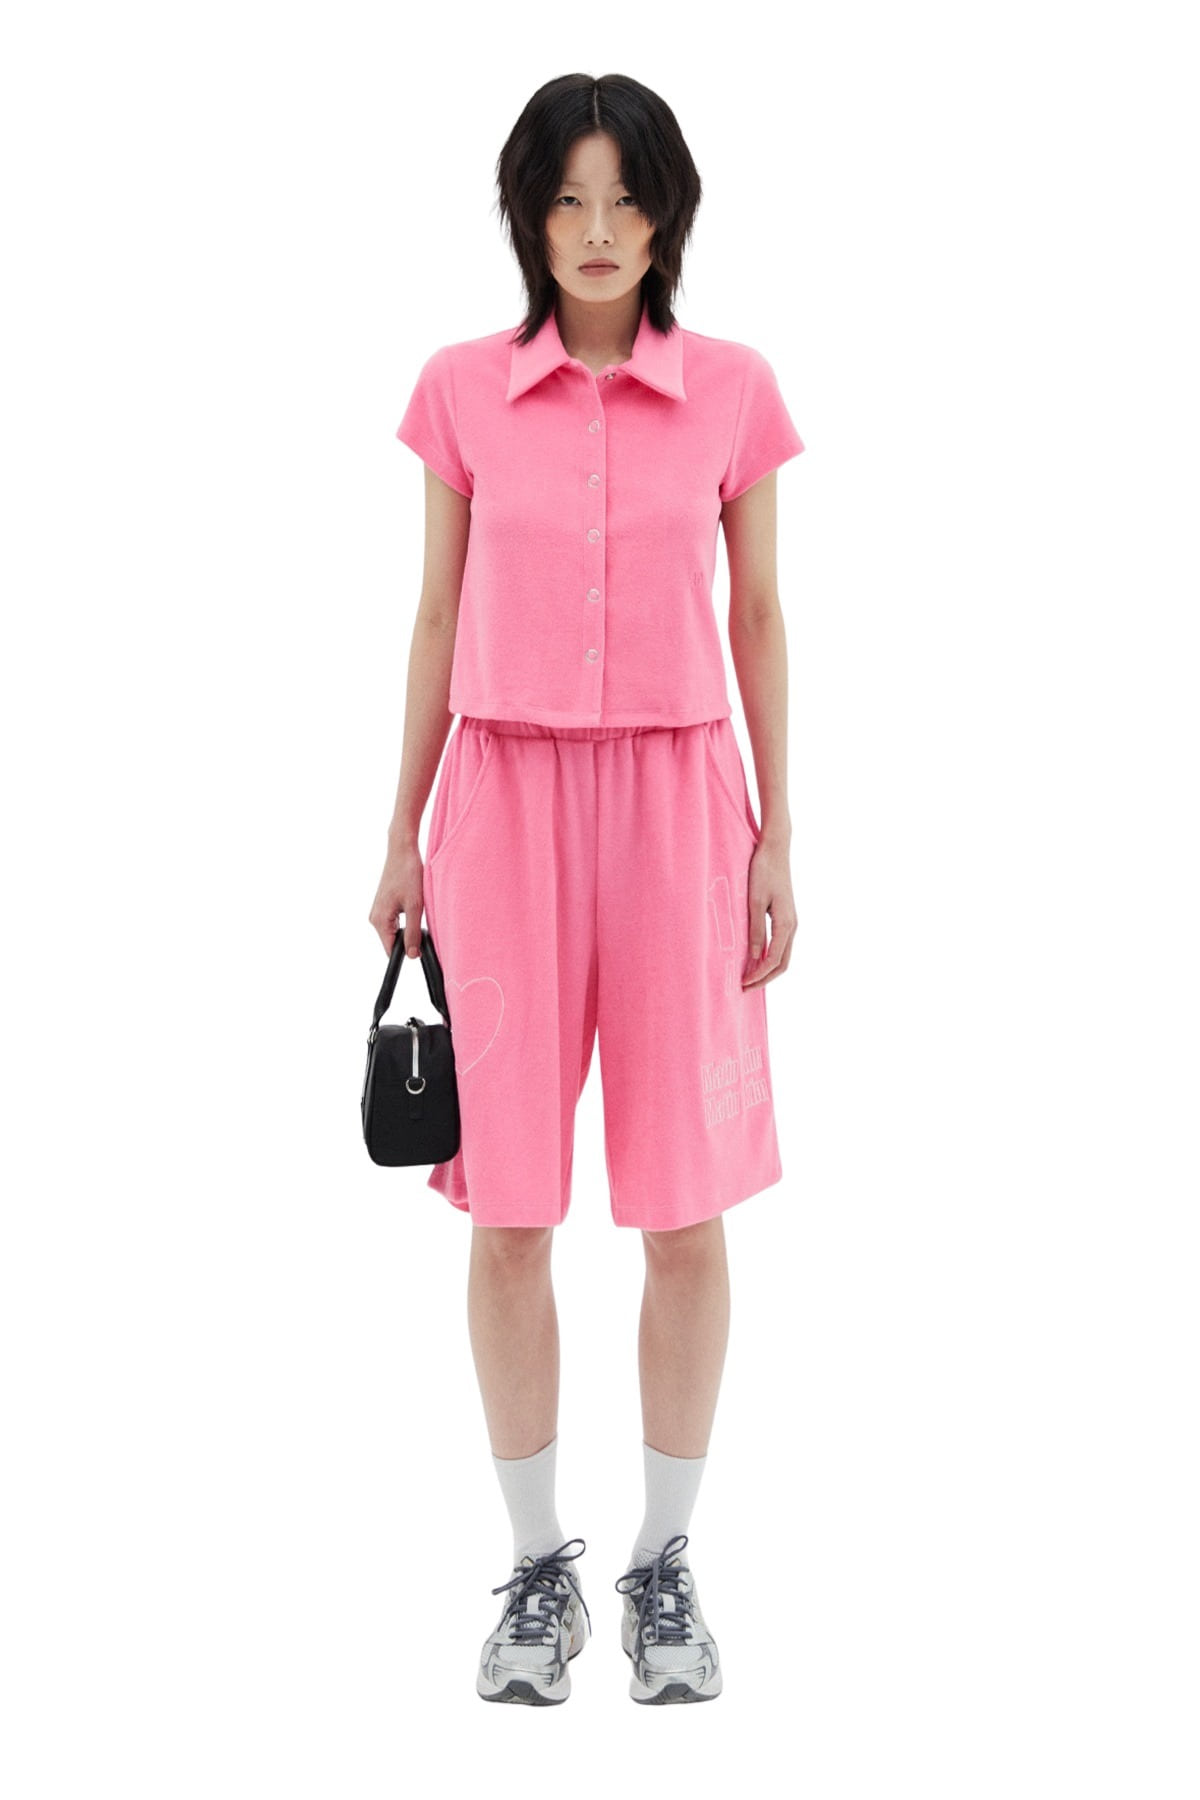 SOFT TOUCH HALF PANTS IN PINK